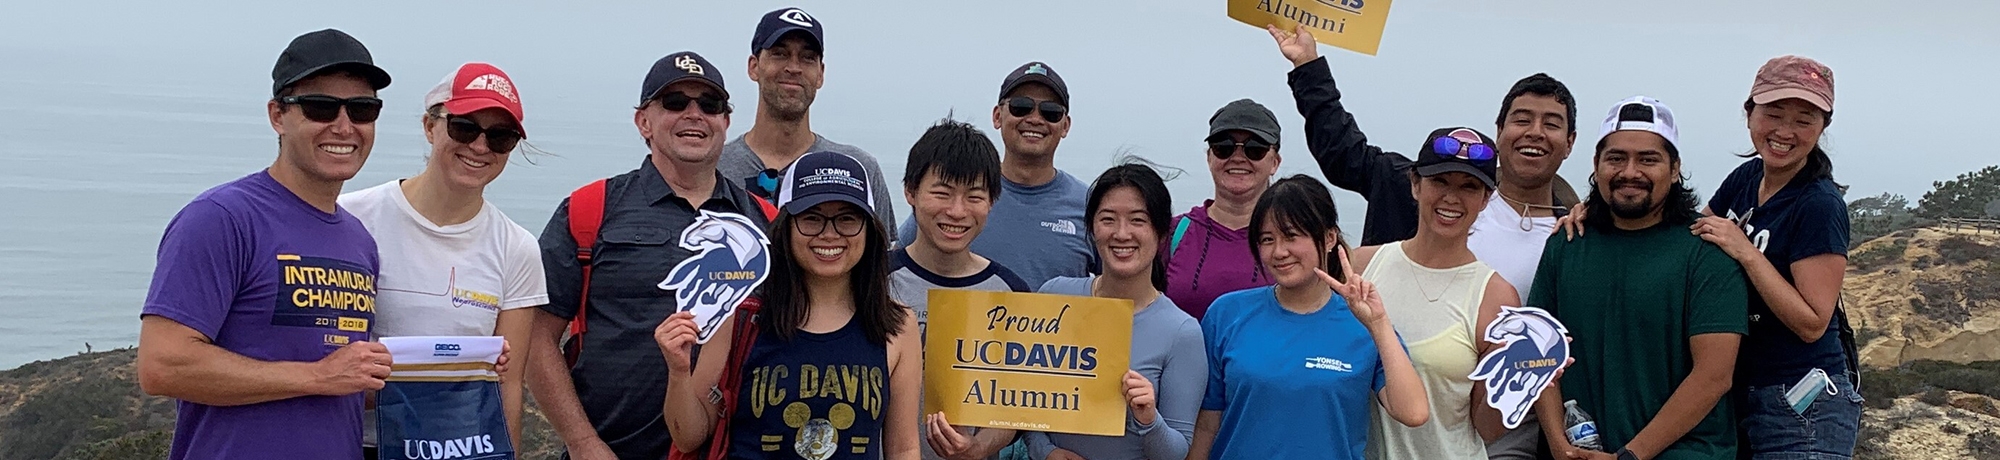 Group of UC Davis alumni holding up "Proud alumni" signs and wearing Aggie merch at the beach.